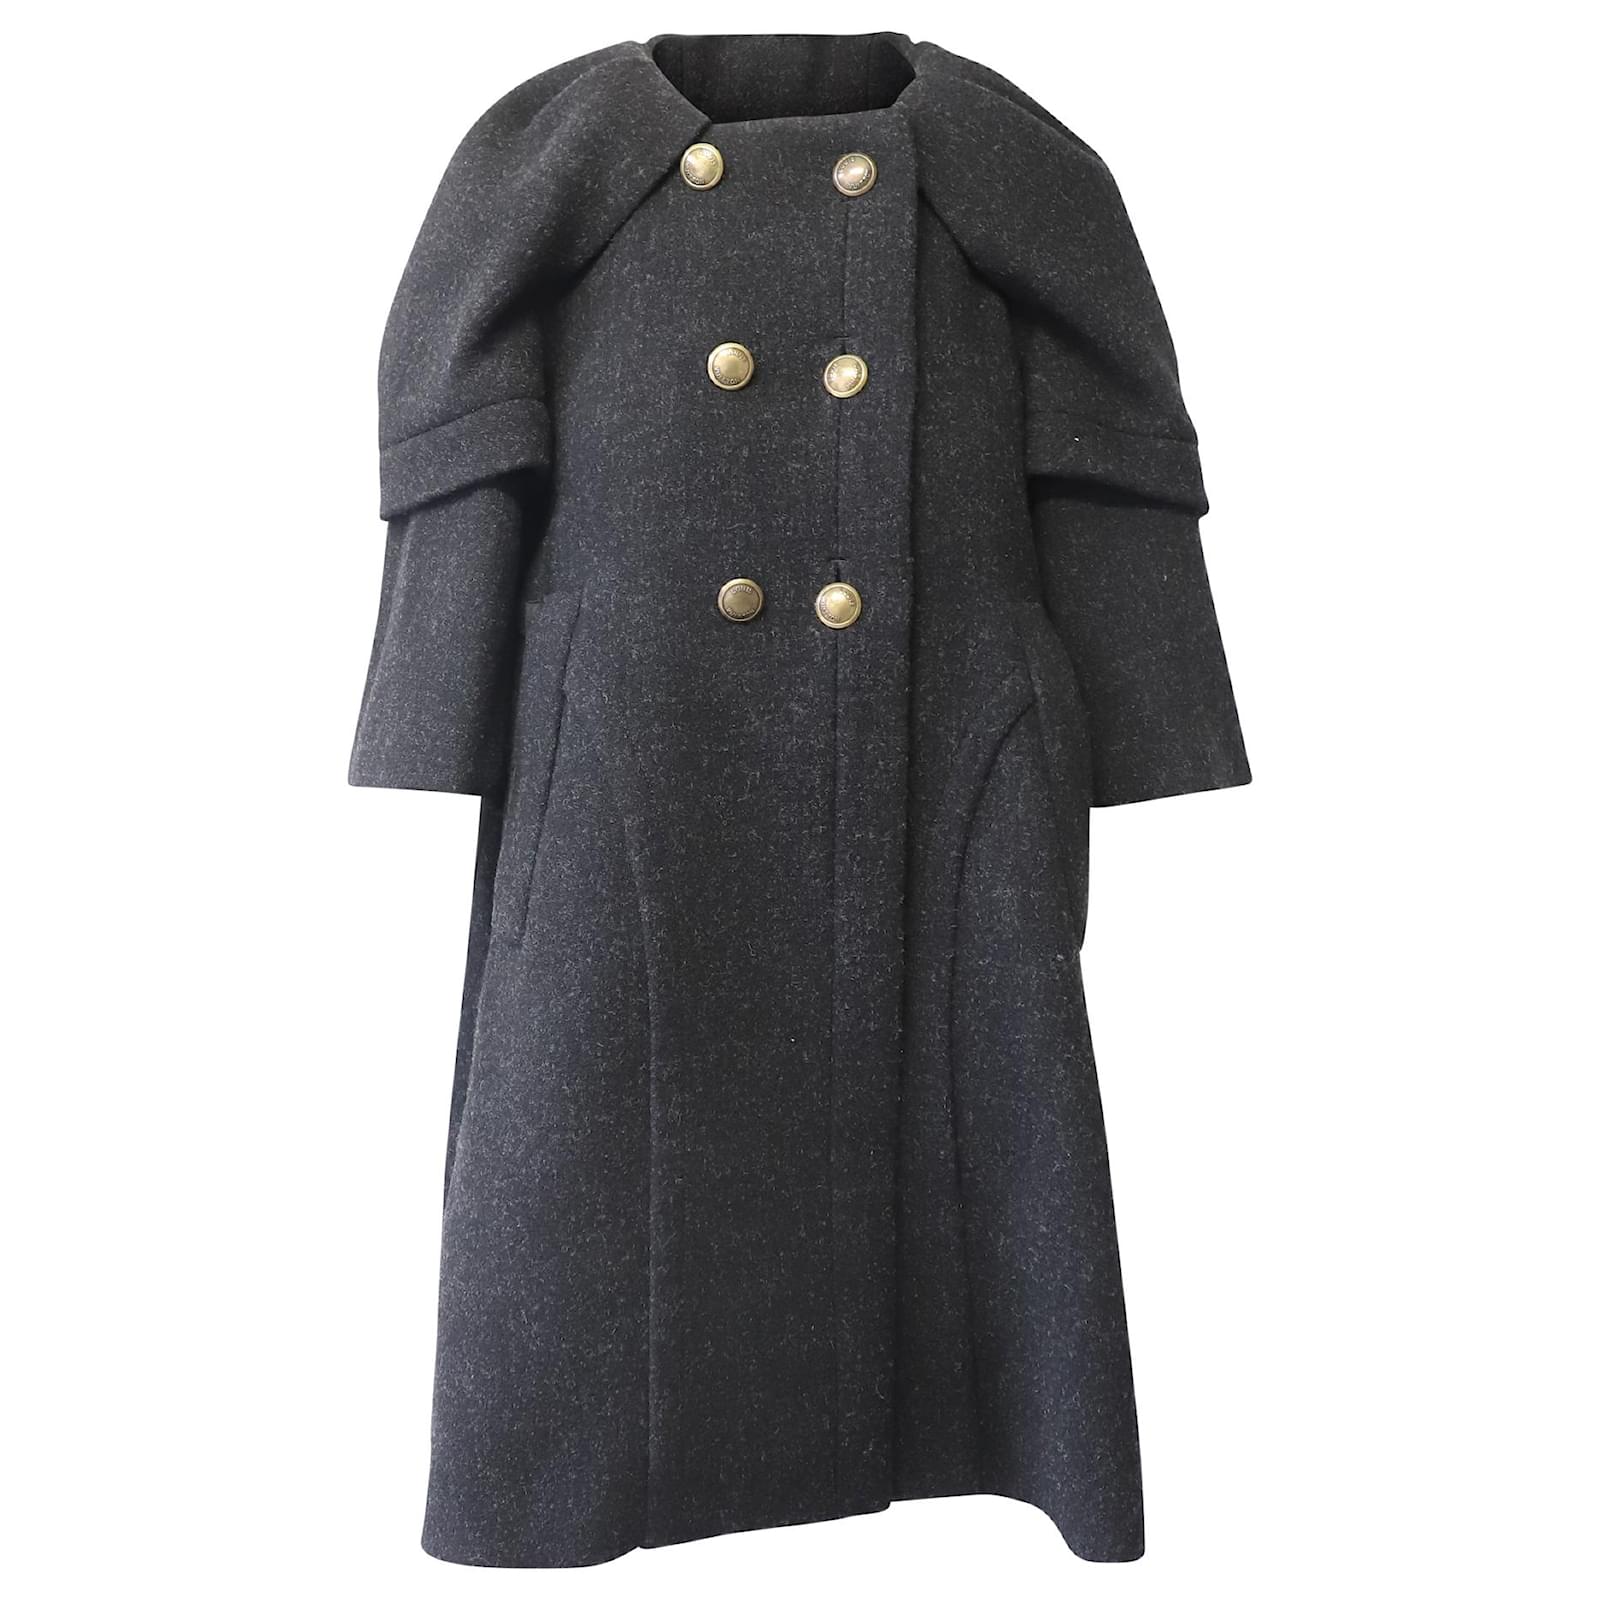 Louis Vuitton Double Breasted Coat with Cape Collar in Grey Wool